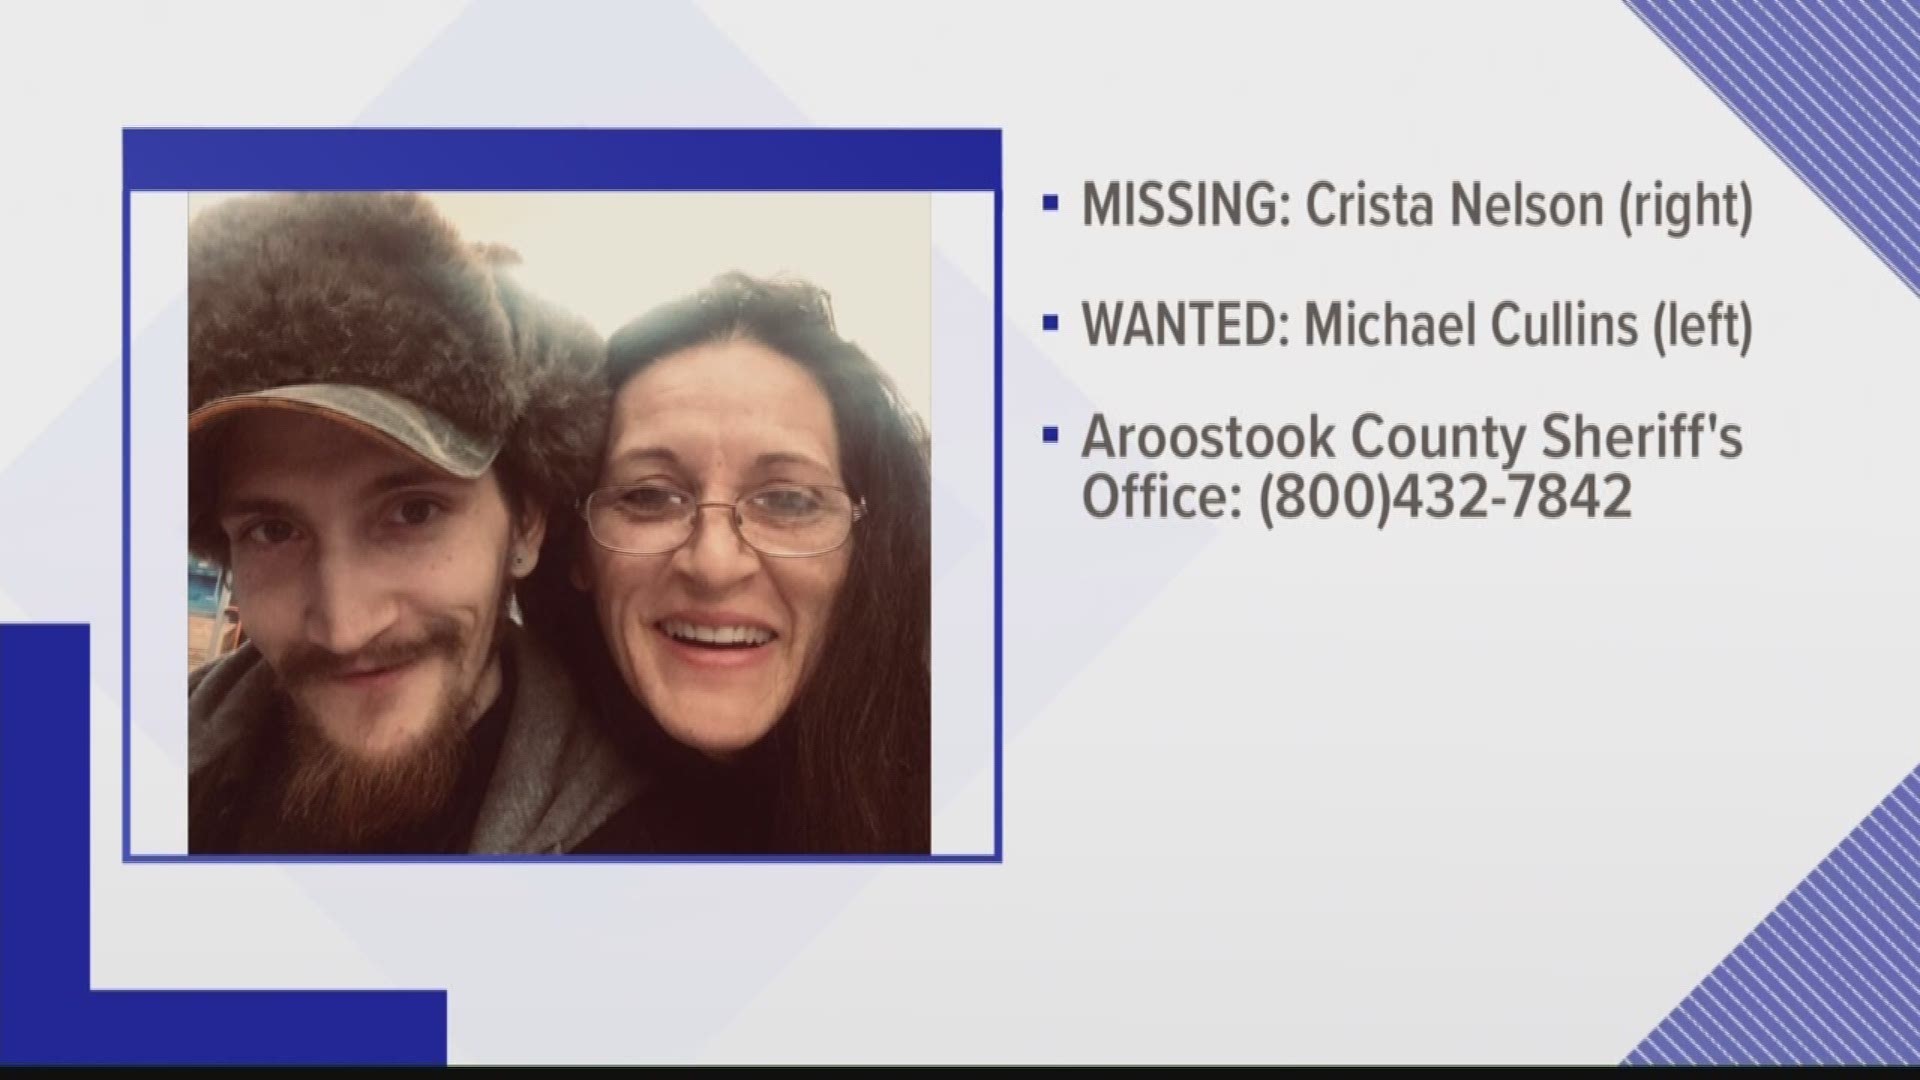 Police search for missing woman, Crista Nelson, and wanted man, Michael Cullins.